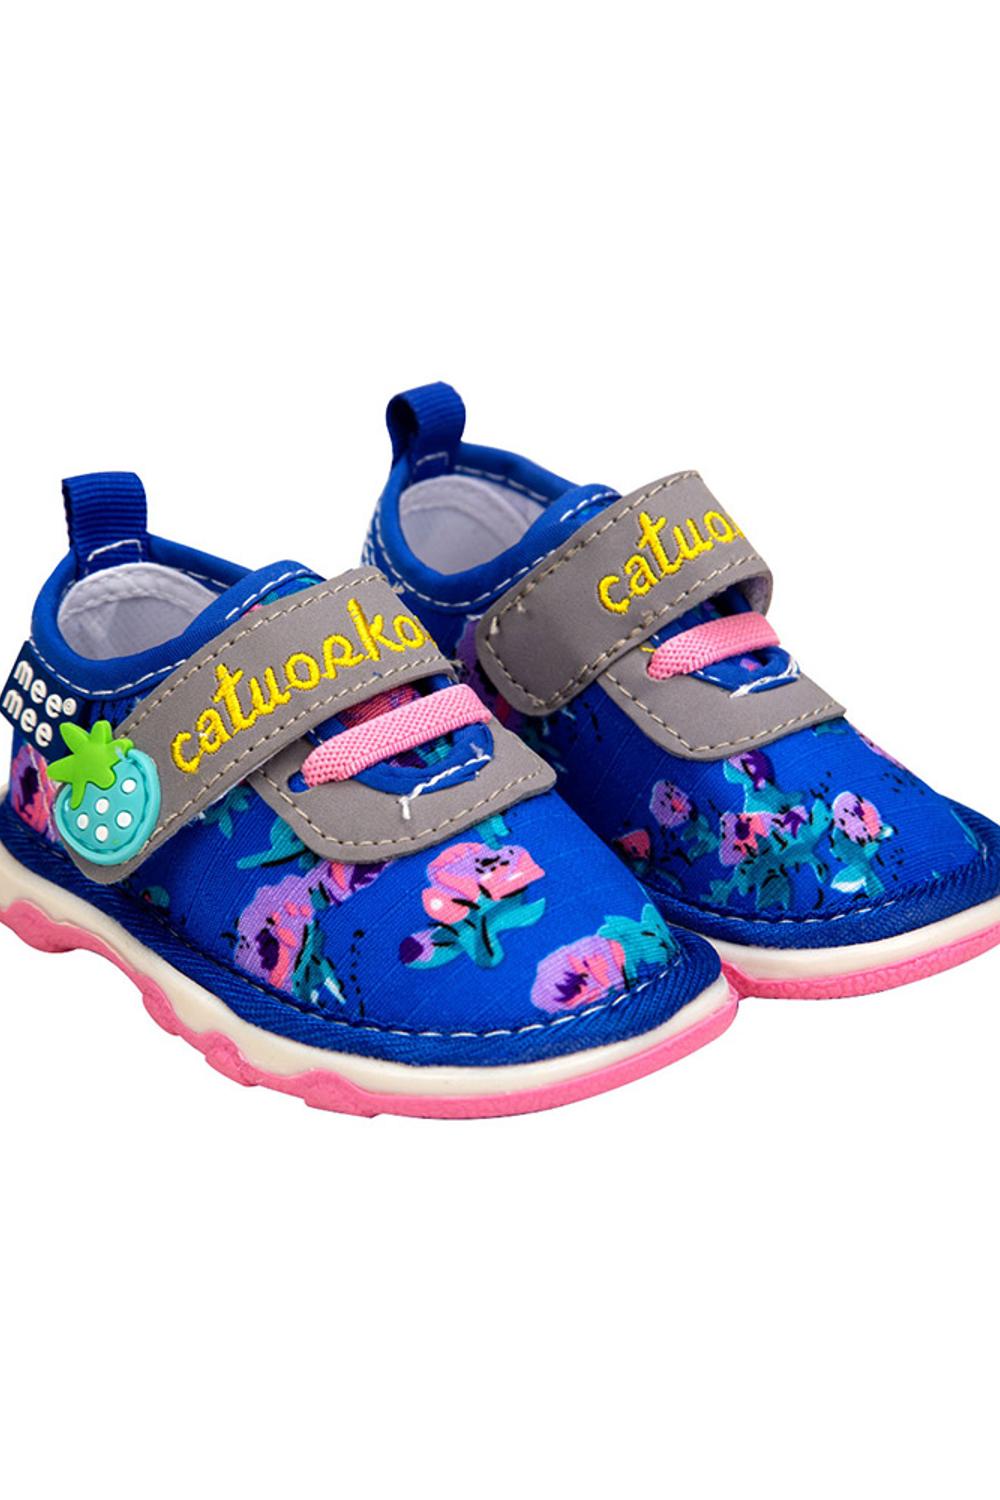 Mee Mee Kids Shoes For Boys